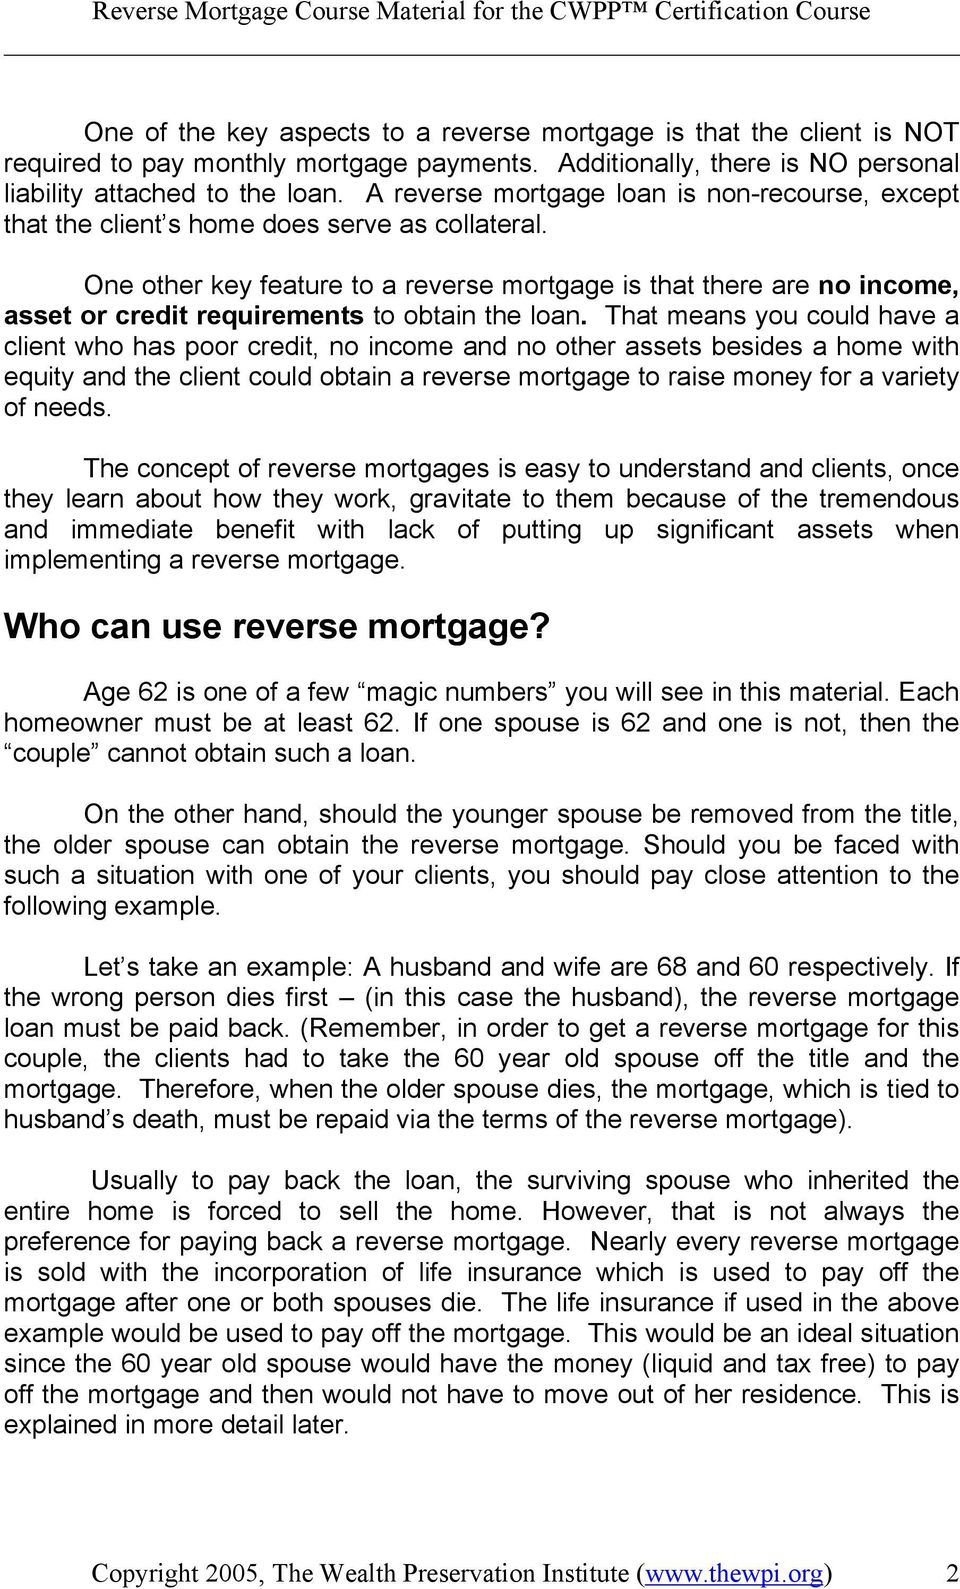 One other key feature to a reverse mortgage is that there are no income, asset or credit requirements to obtain the loan.